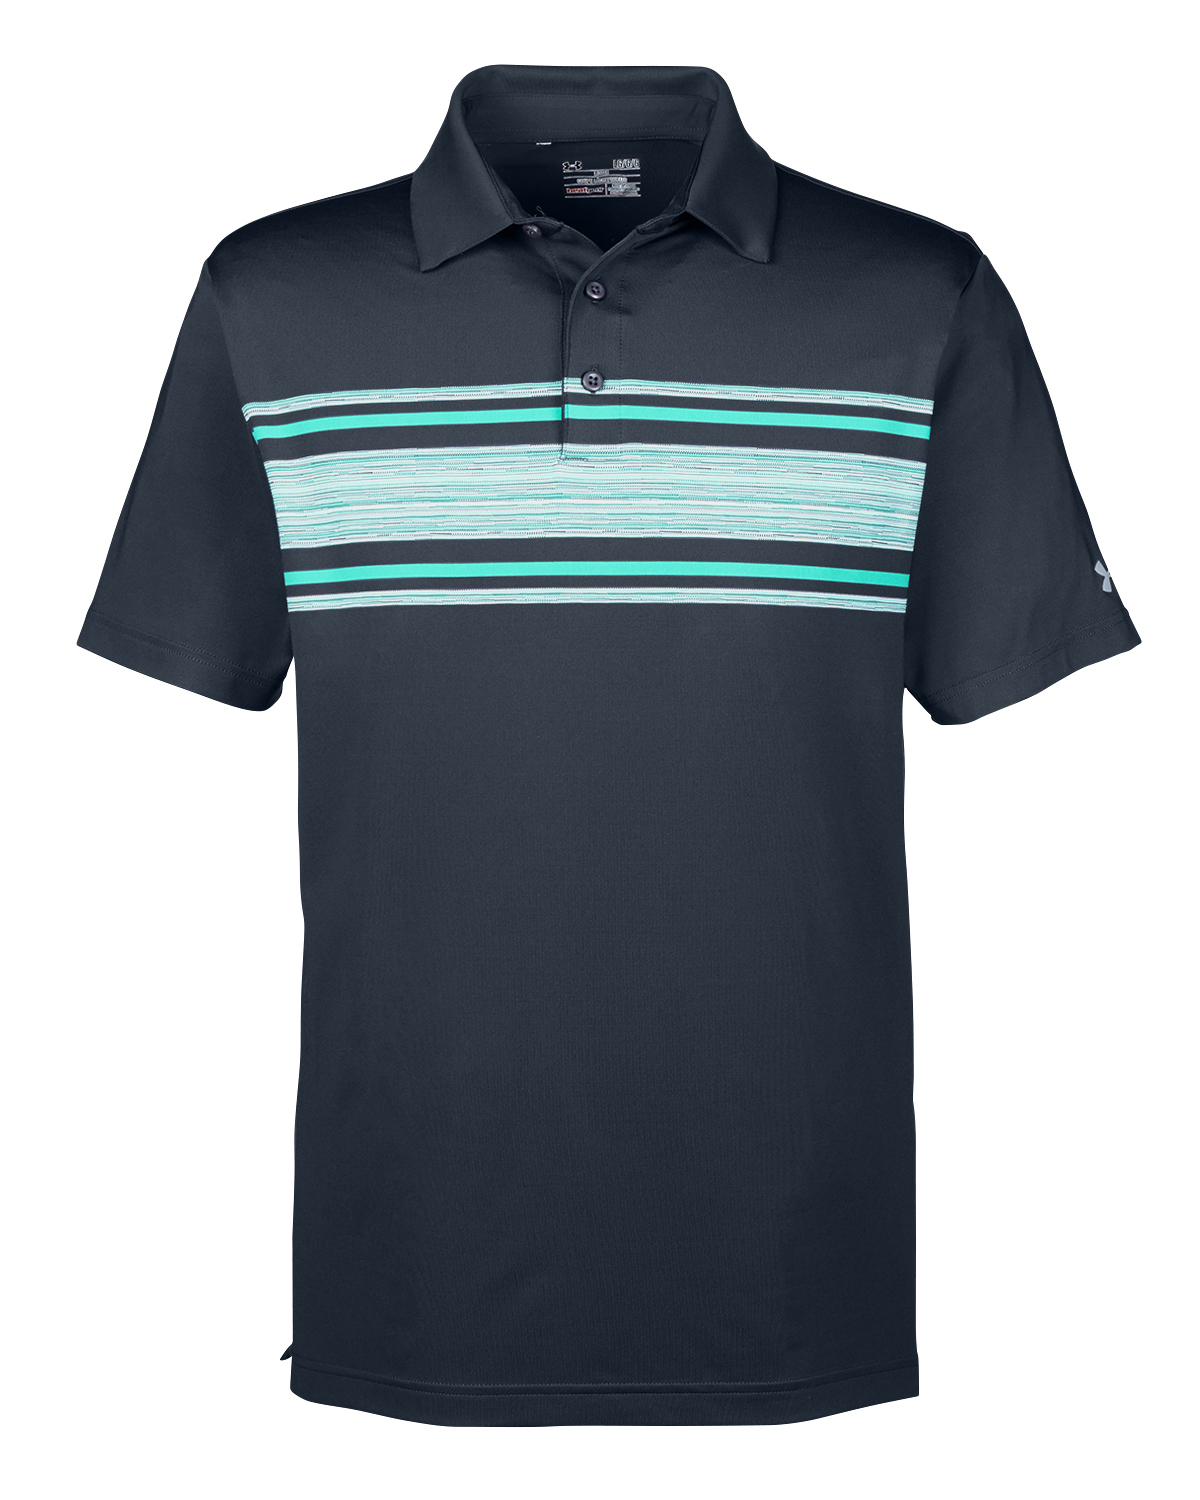 Under Armour 1253479 - Men's Playoff Space Dyed Polo